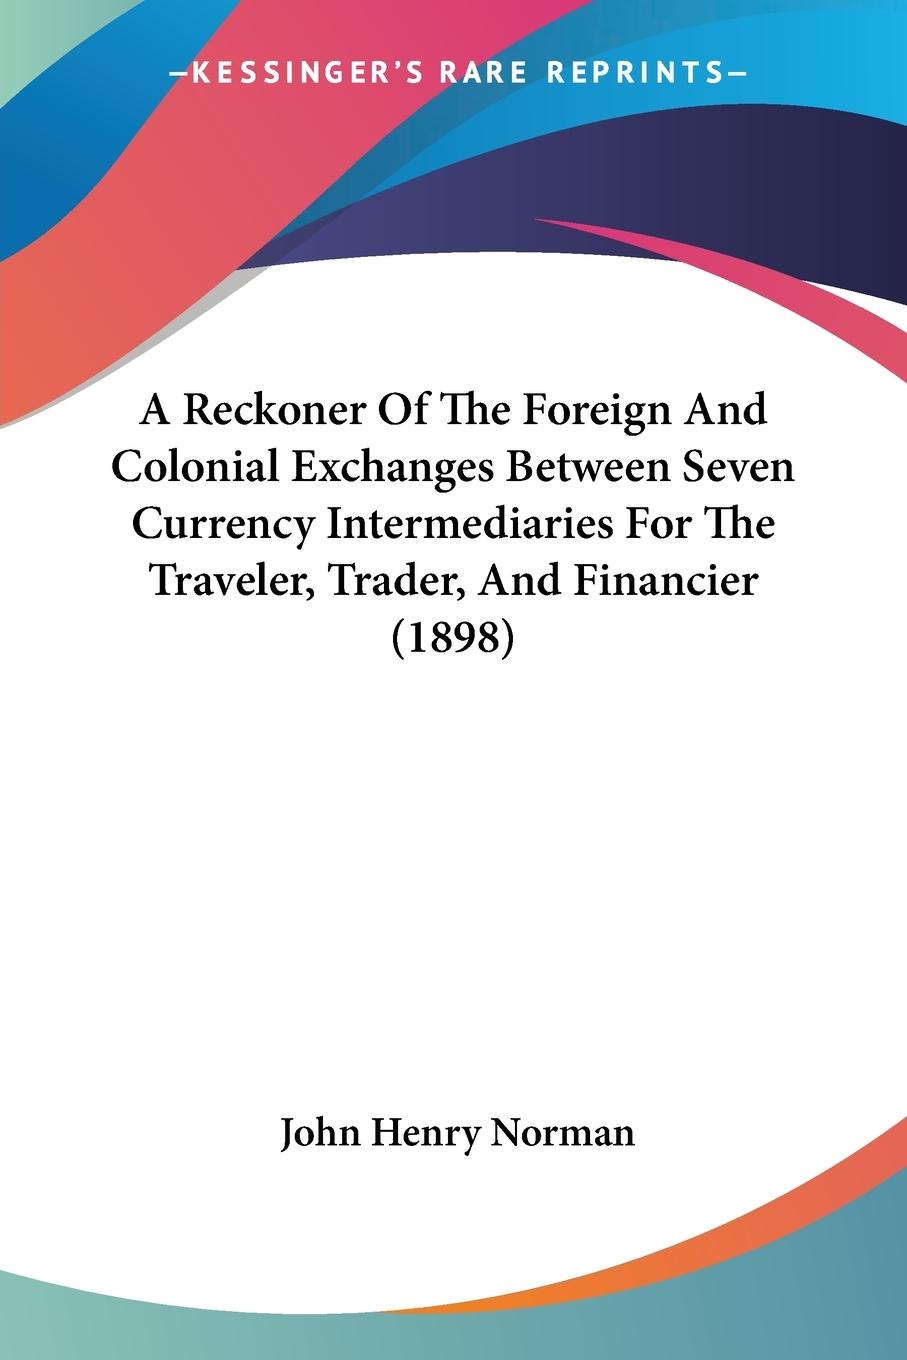 A Reckoner Of The Foreign And Colonial Exchanges Between Seven Currency Intermediaries For The Traveler, Trader, And Financier (1898) - Norman, John Henry